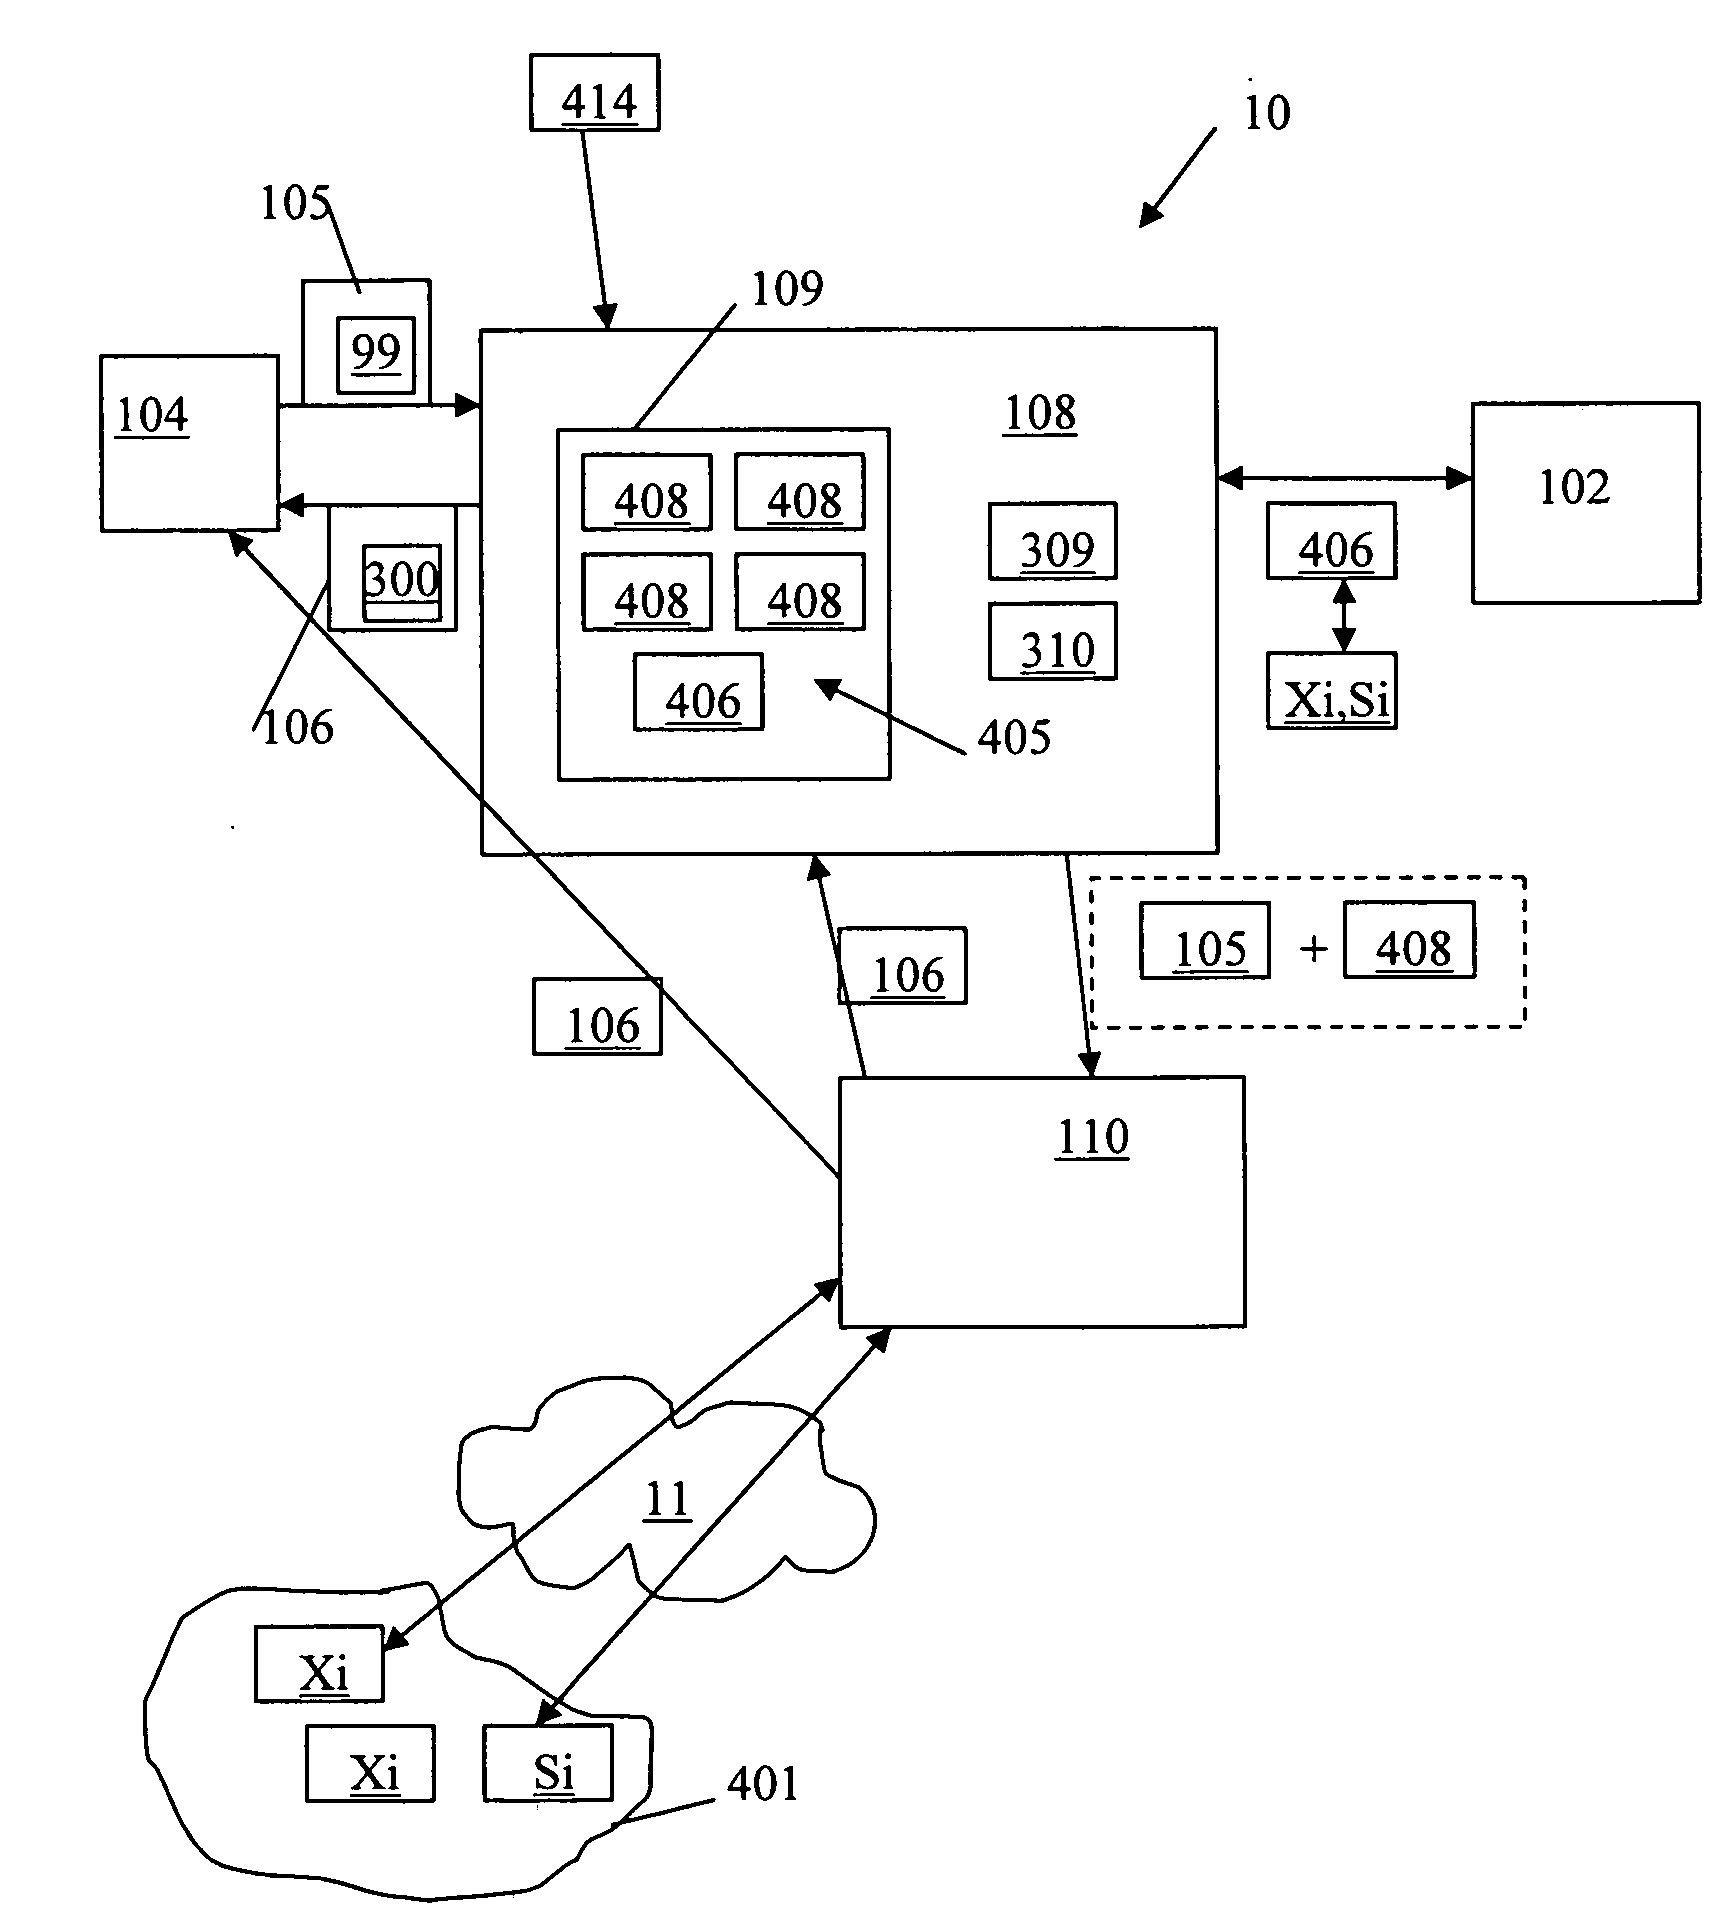 Entity networking system using displayed information for exploring connectedness of selected entities